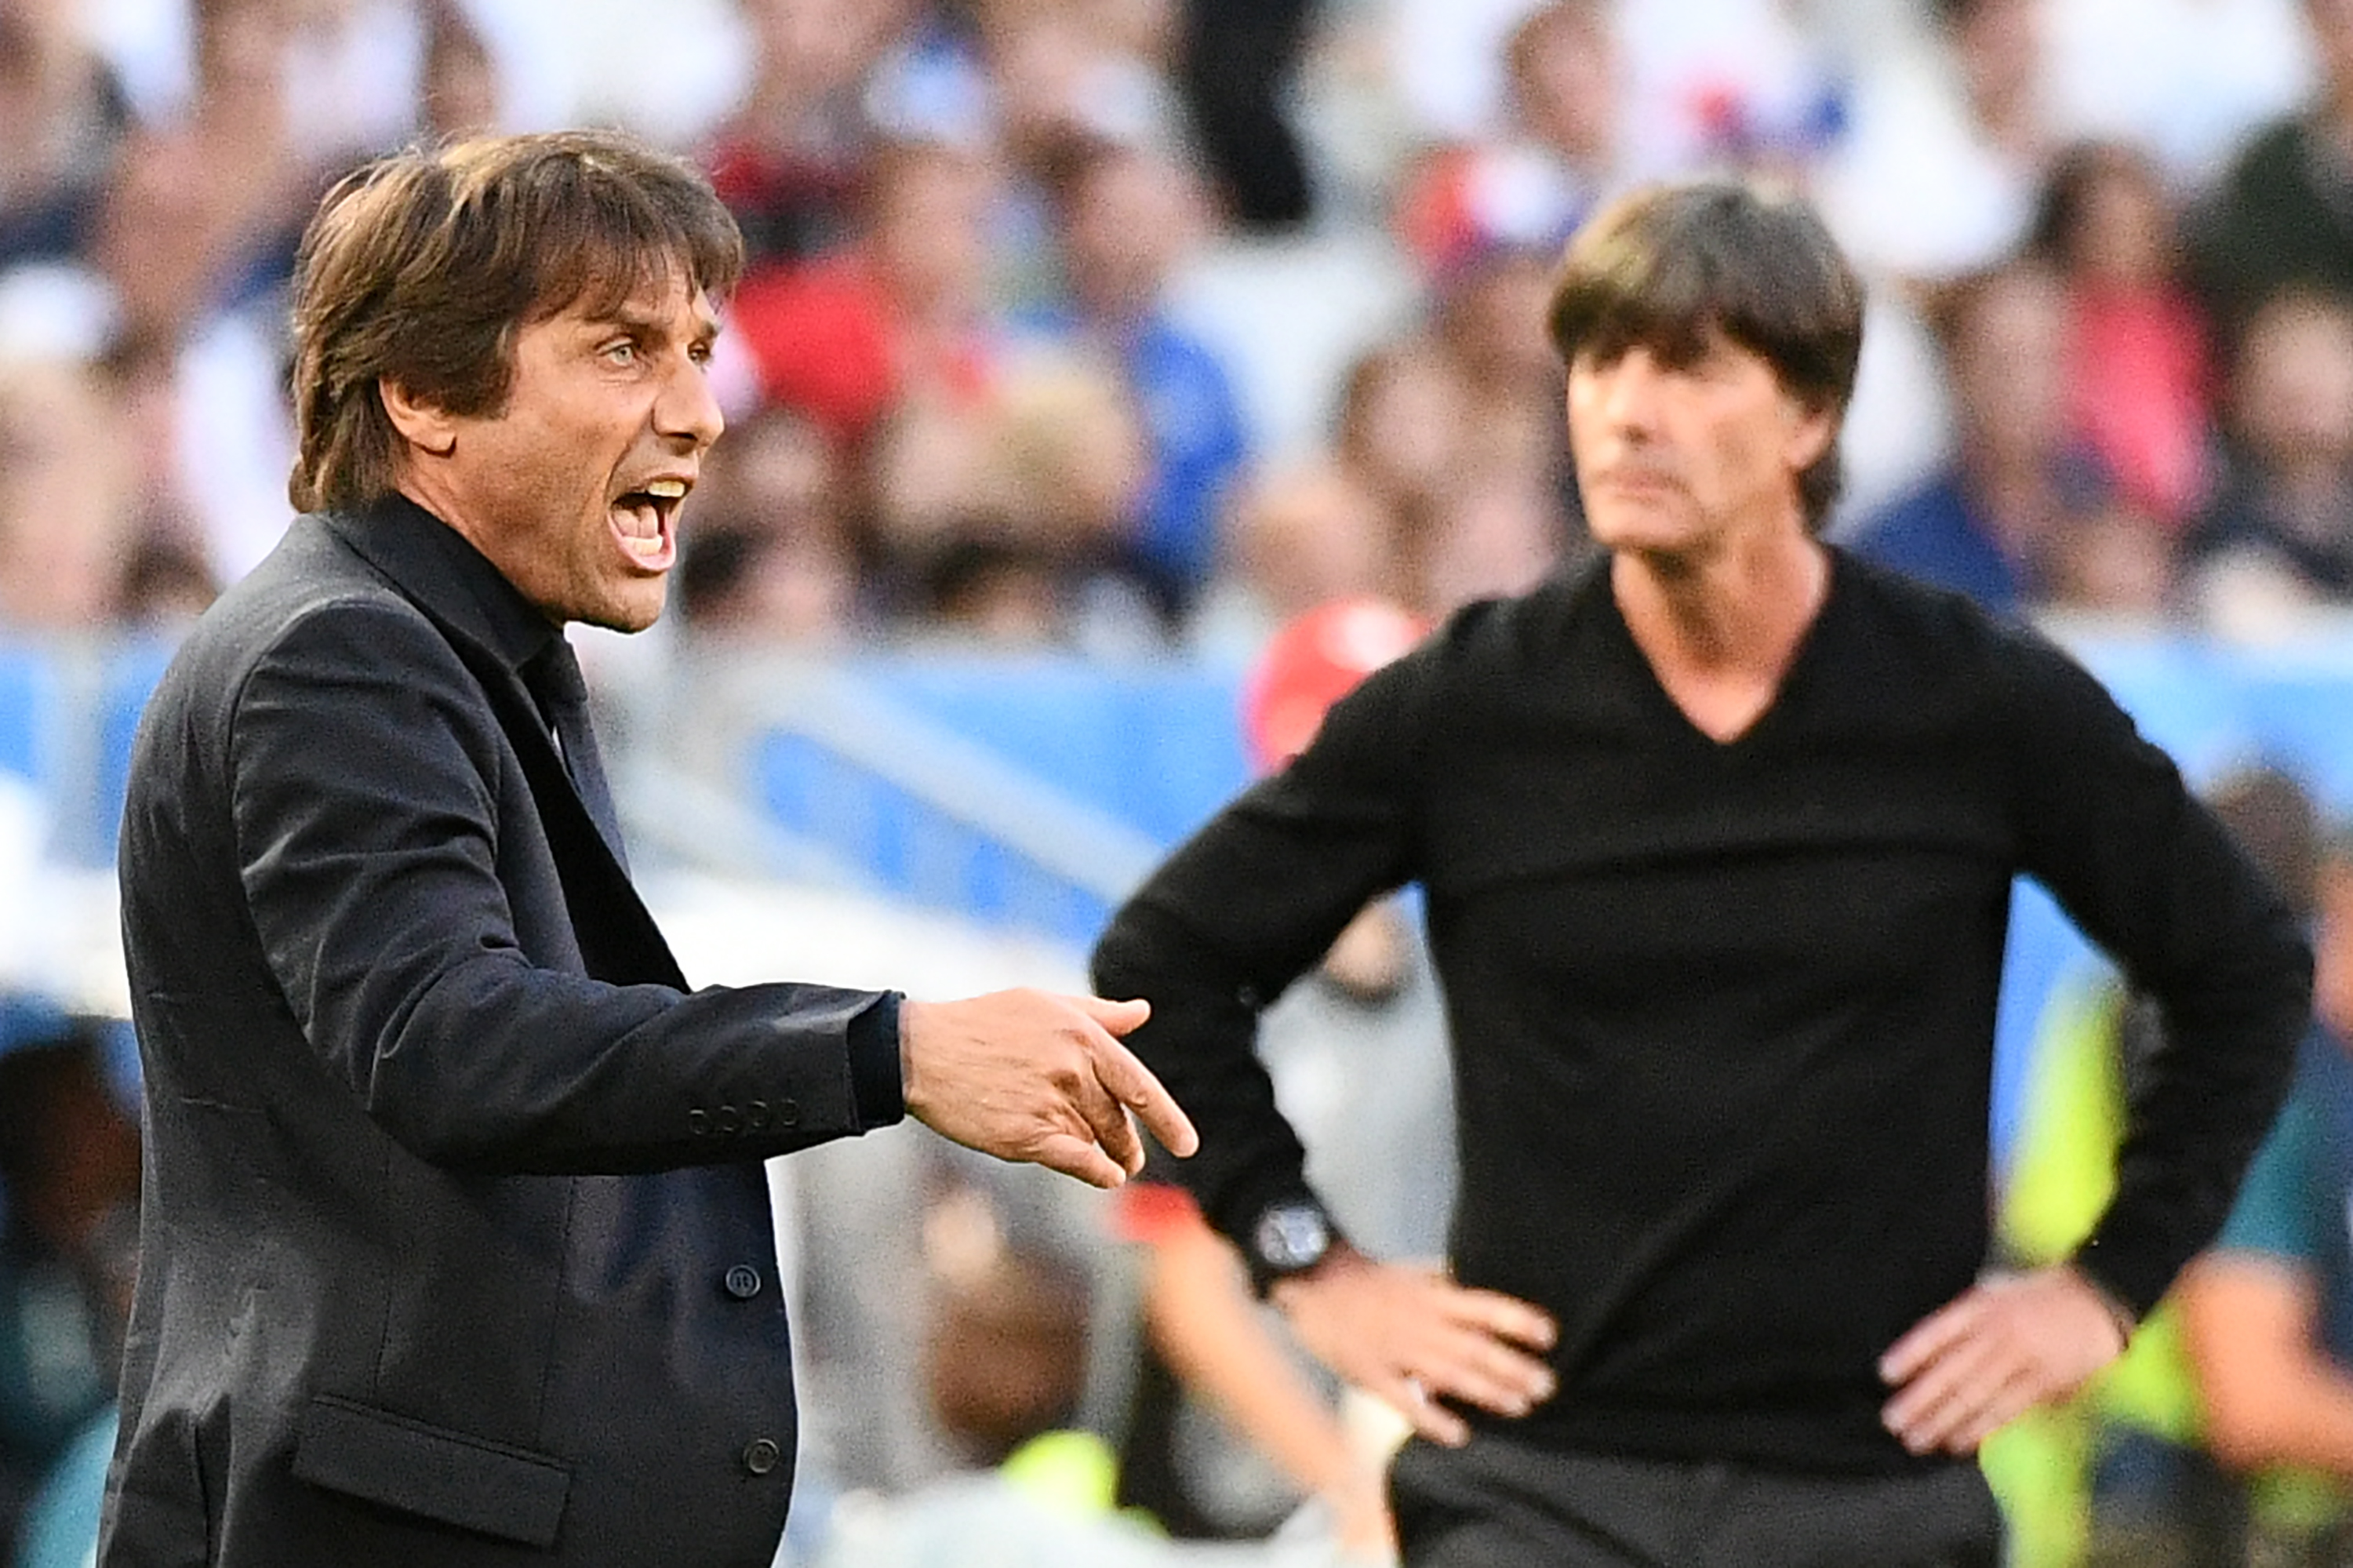 Italy's coach Antonio Conte (L) reacts as Germany's coach Joachim Loew (R) looks on during the Euro 2016 quarter-final football match between Germany and Italy at the Matmut Atlantique stadium in Bordeaux on July 2, 2016.
 / AFP / VINCENZO PINTO        (Photo credit should read VINCENZO PINTO/AFP/Getty Images)